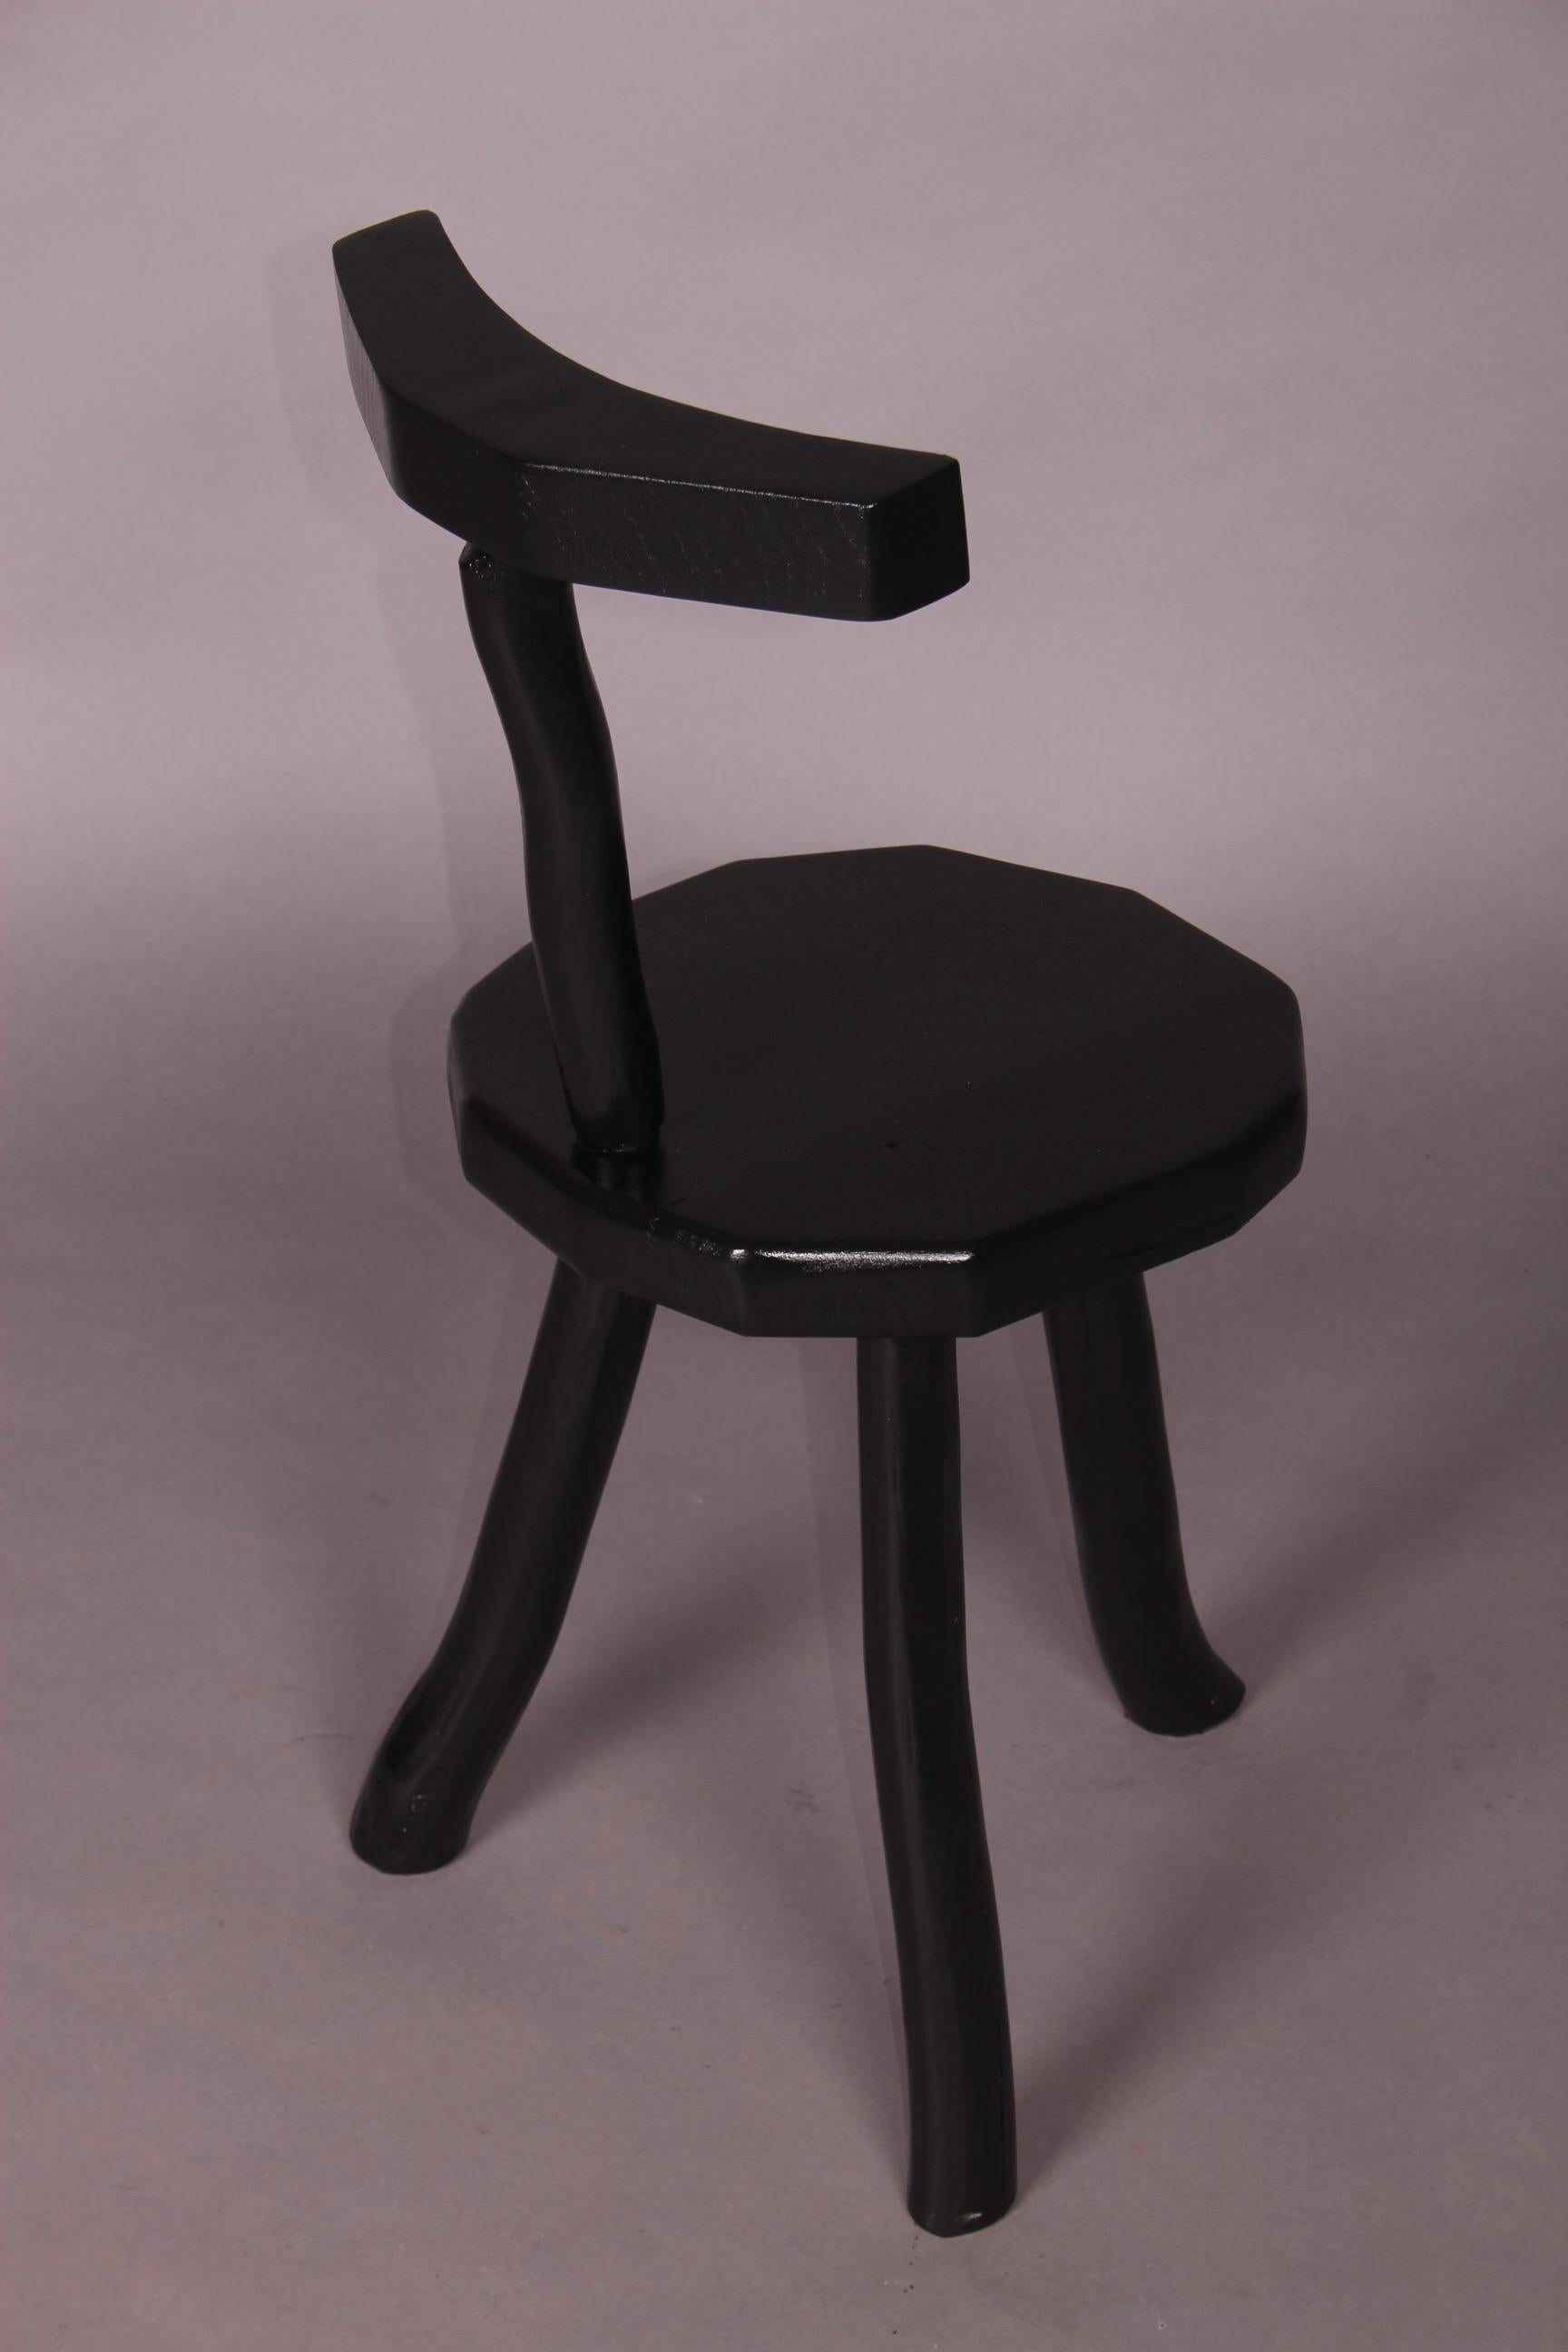 Black painted chair.